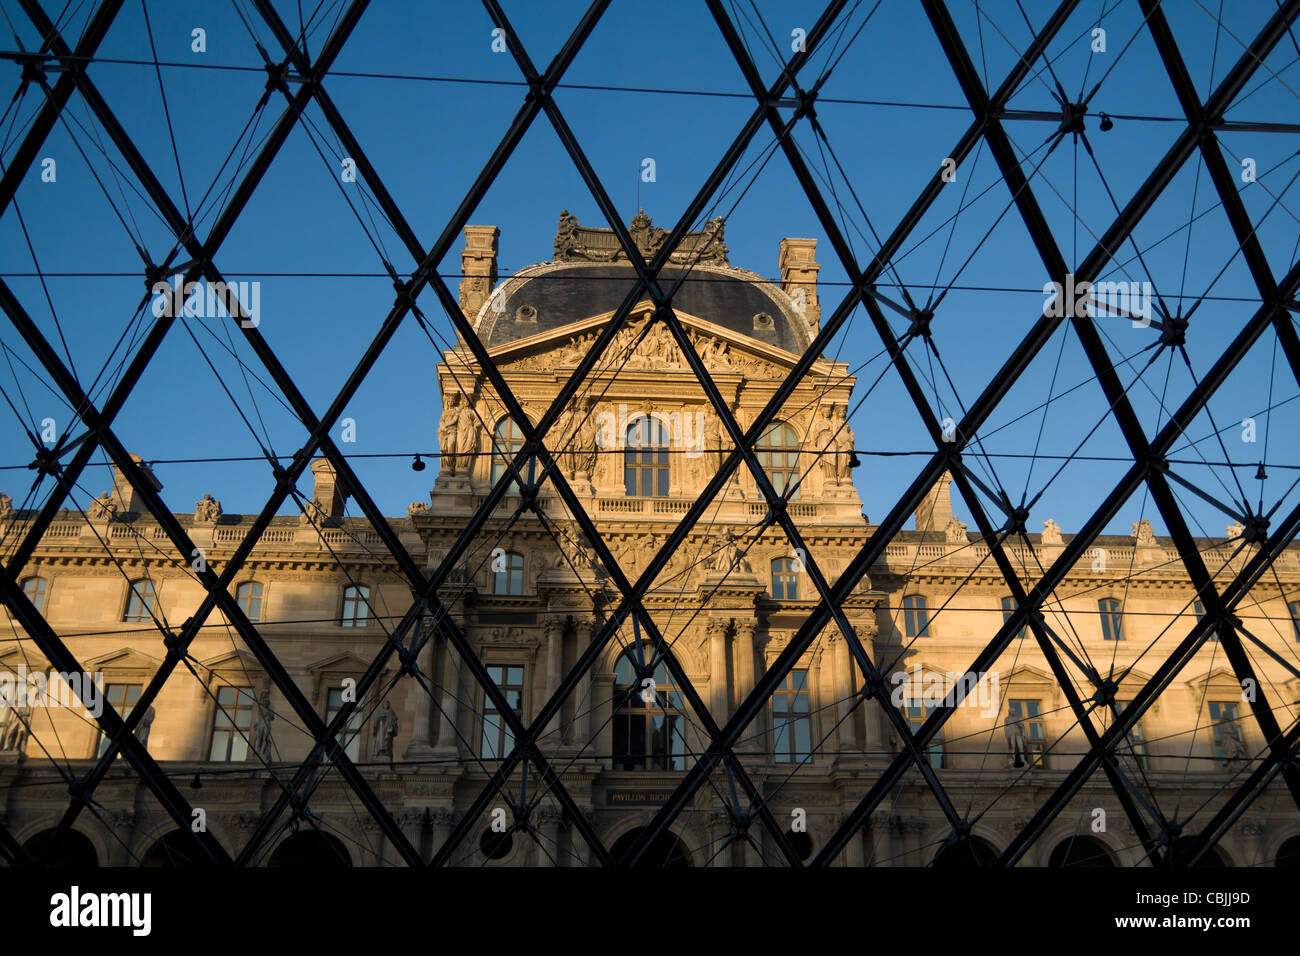 The Louvre Museum from inside Pyramid, Paris, France Stock Photo